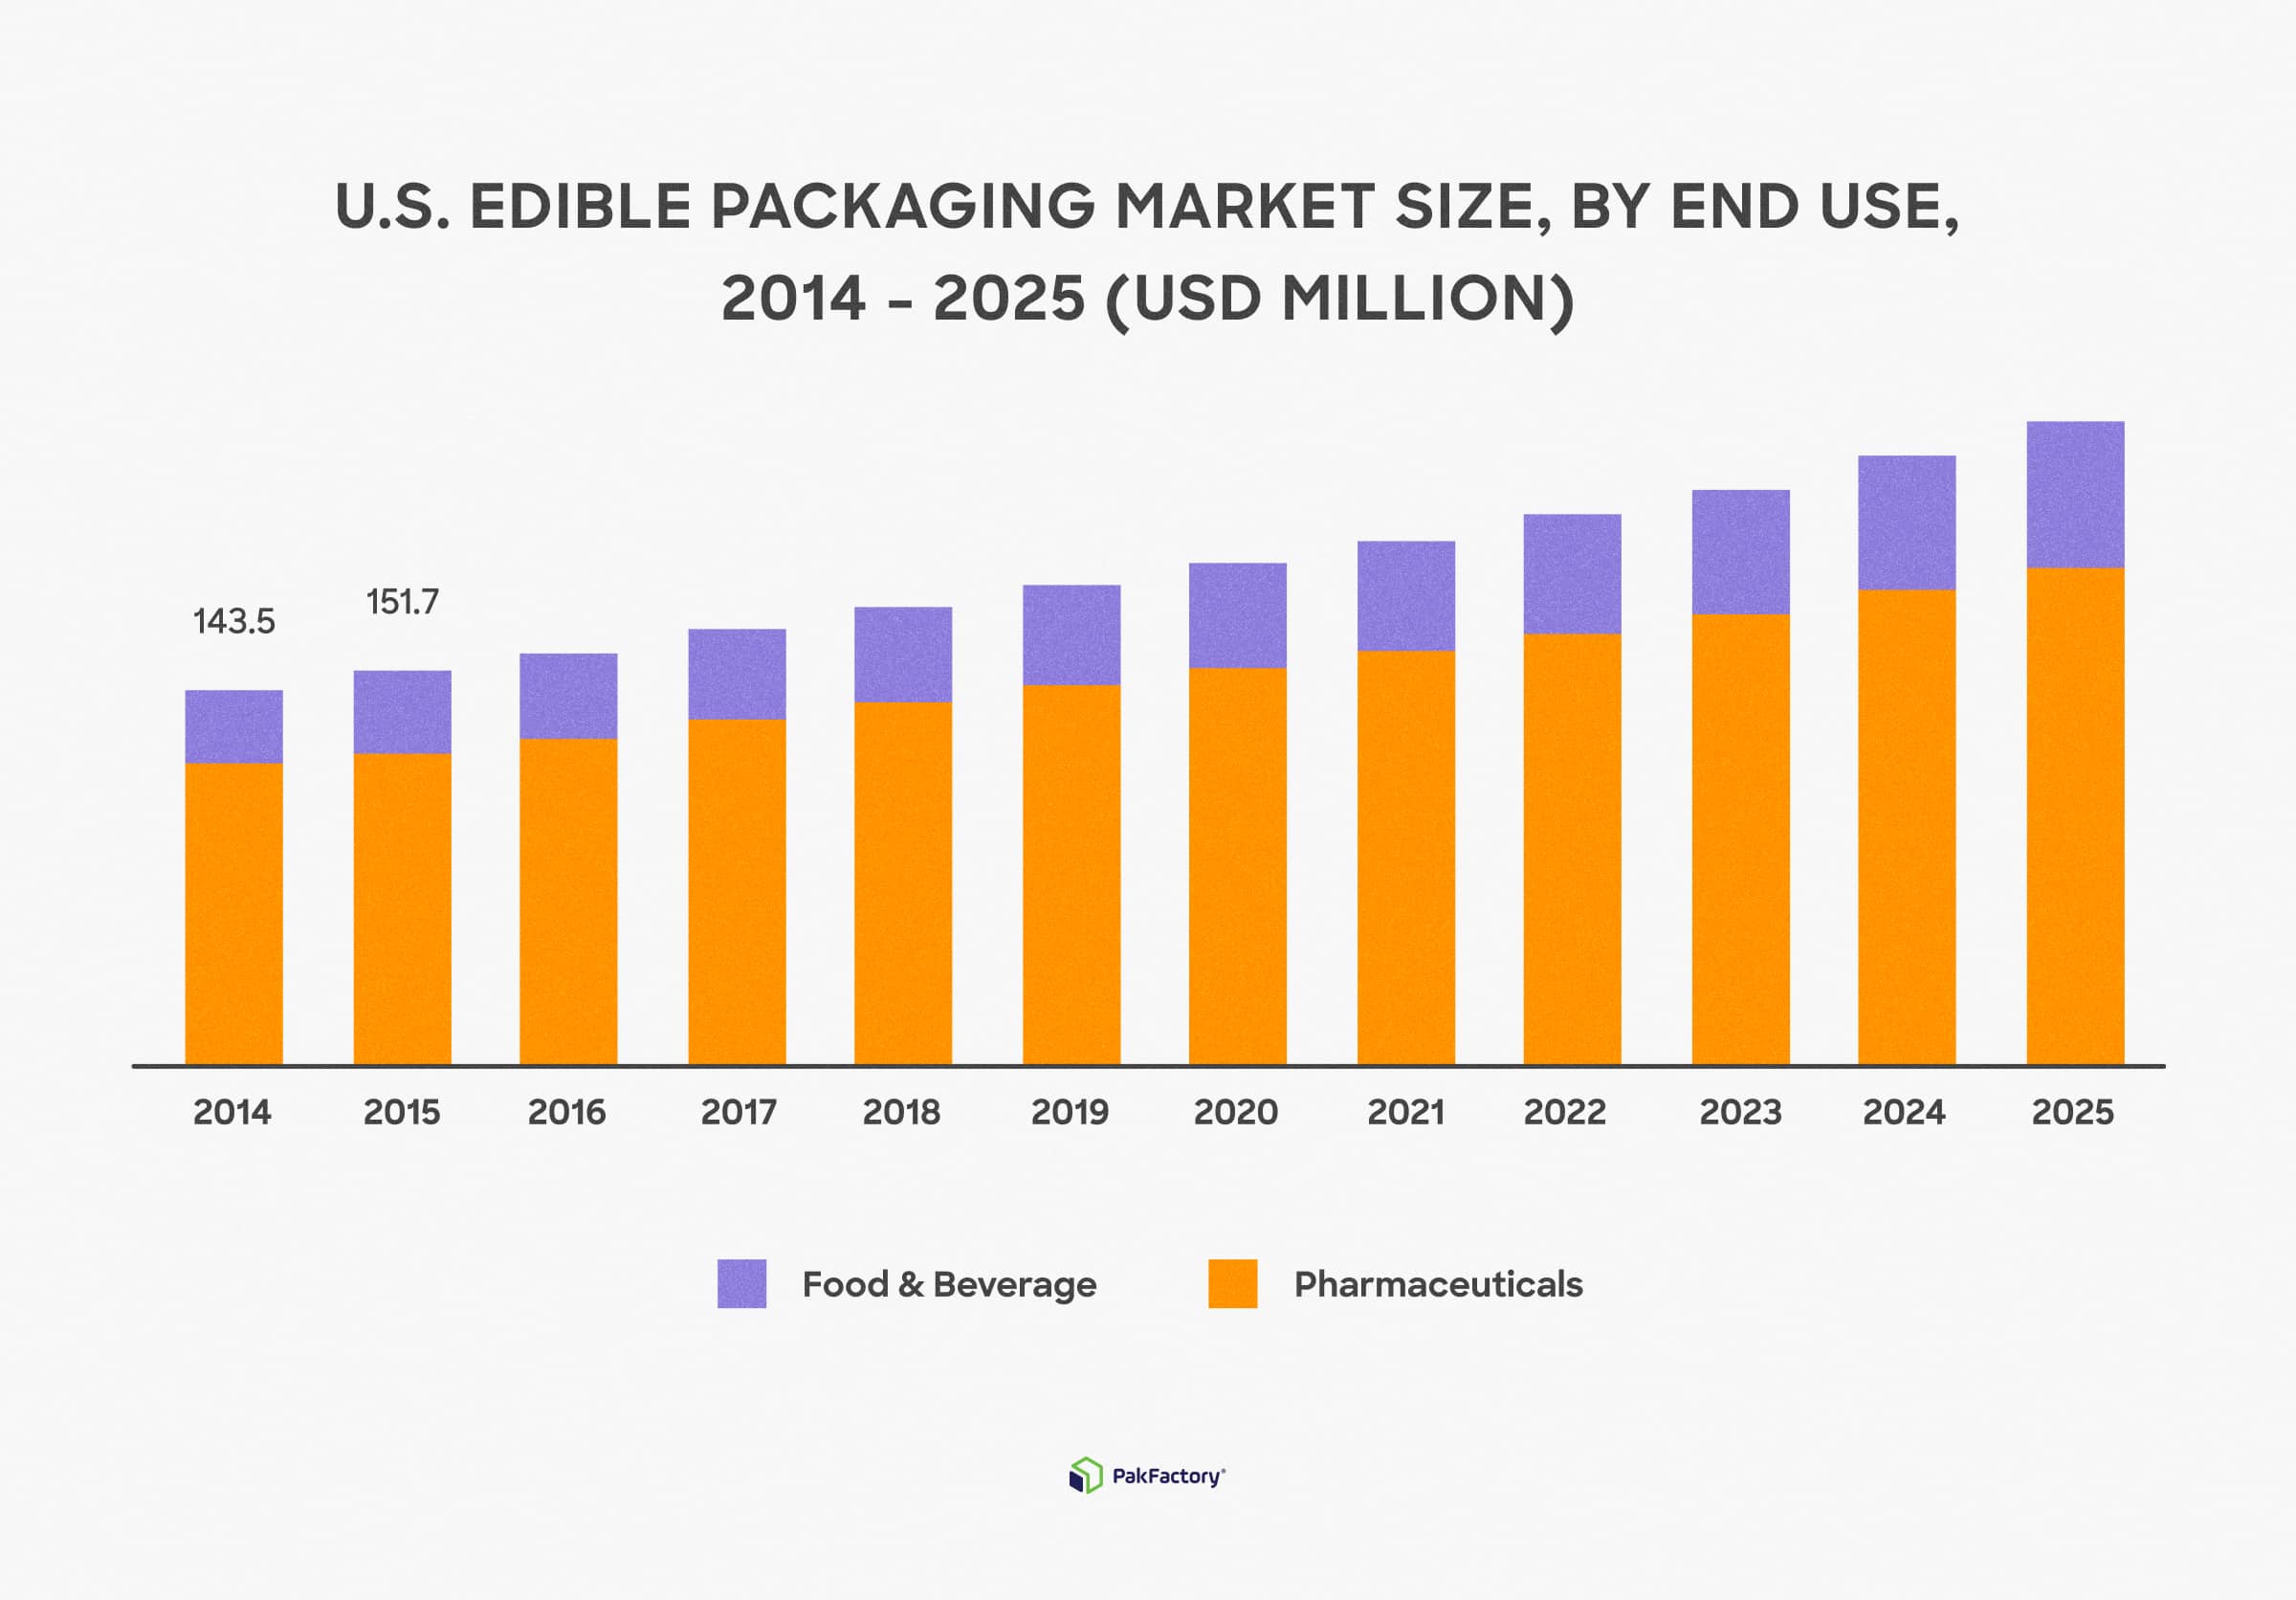 Edible packaging market growth rate.